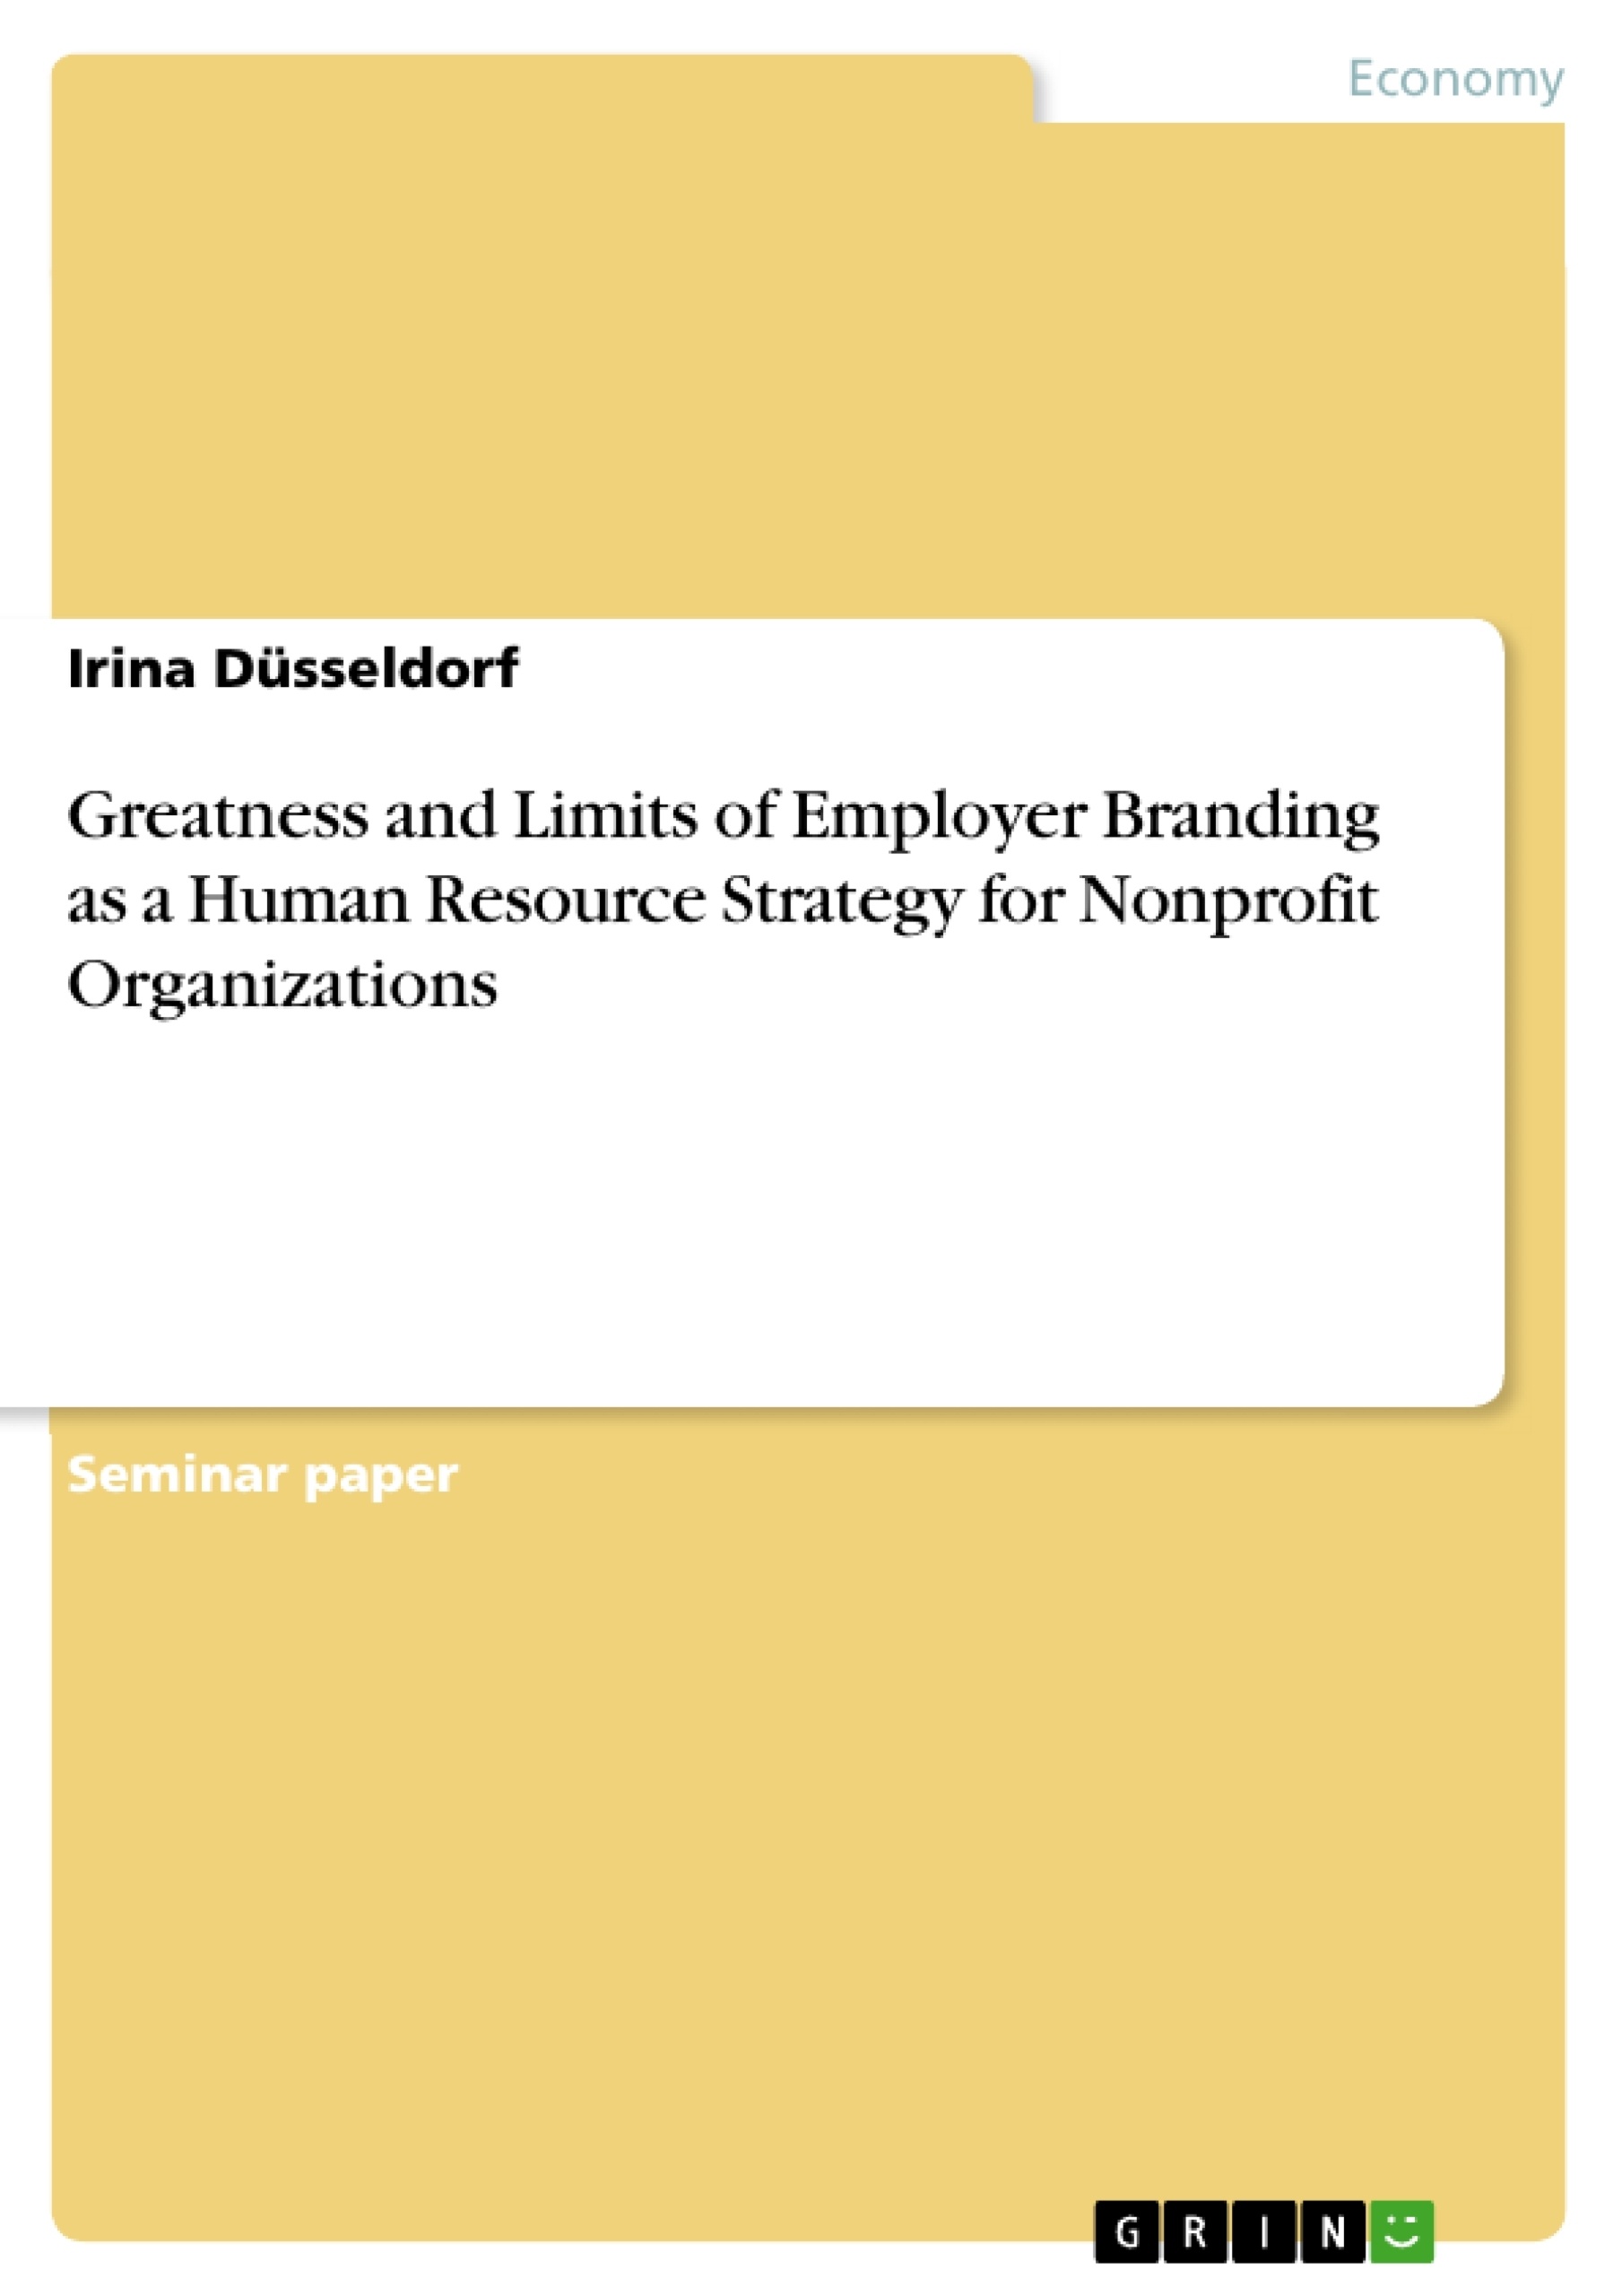 Titel: Greatness and Limits of Employer Branding as a Human Resource Strategy for Nonprofit Organizations